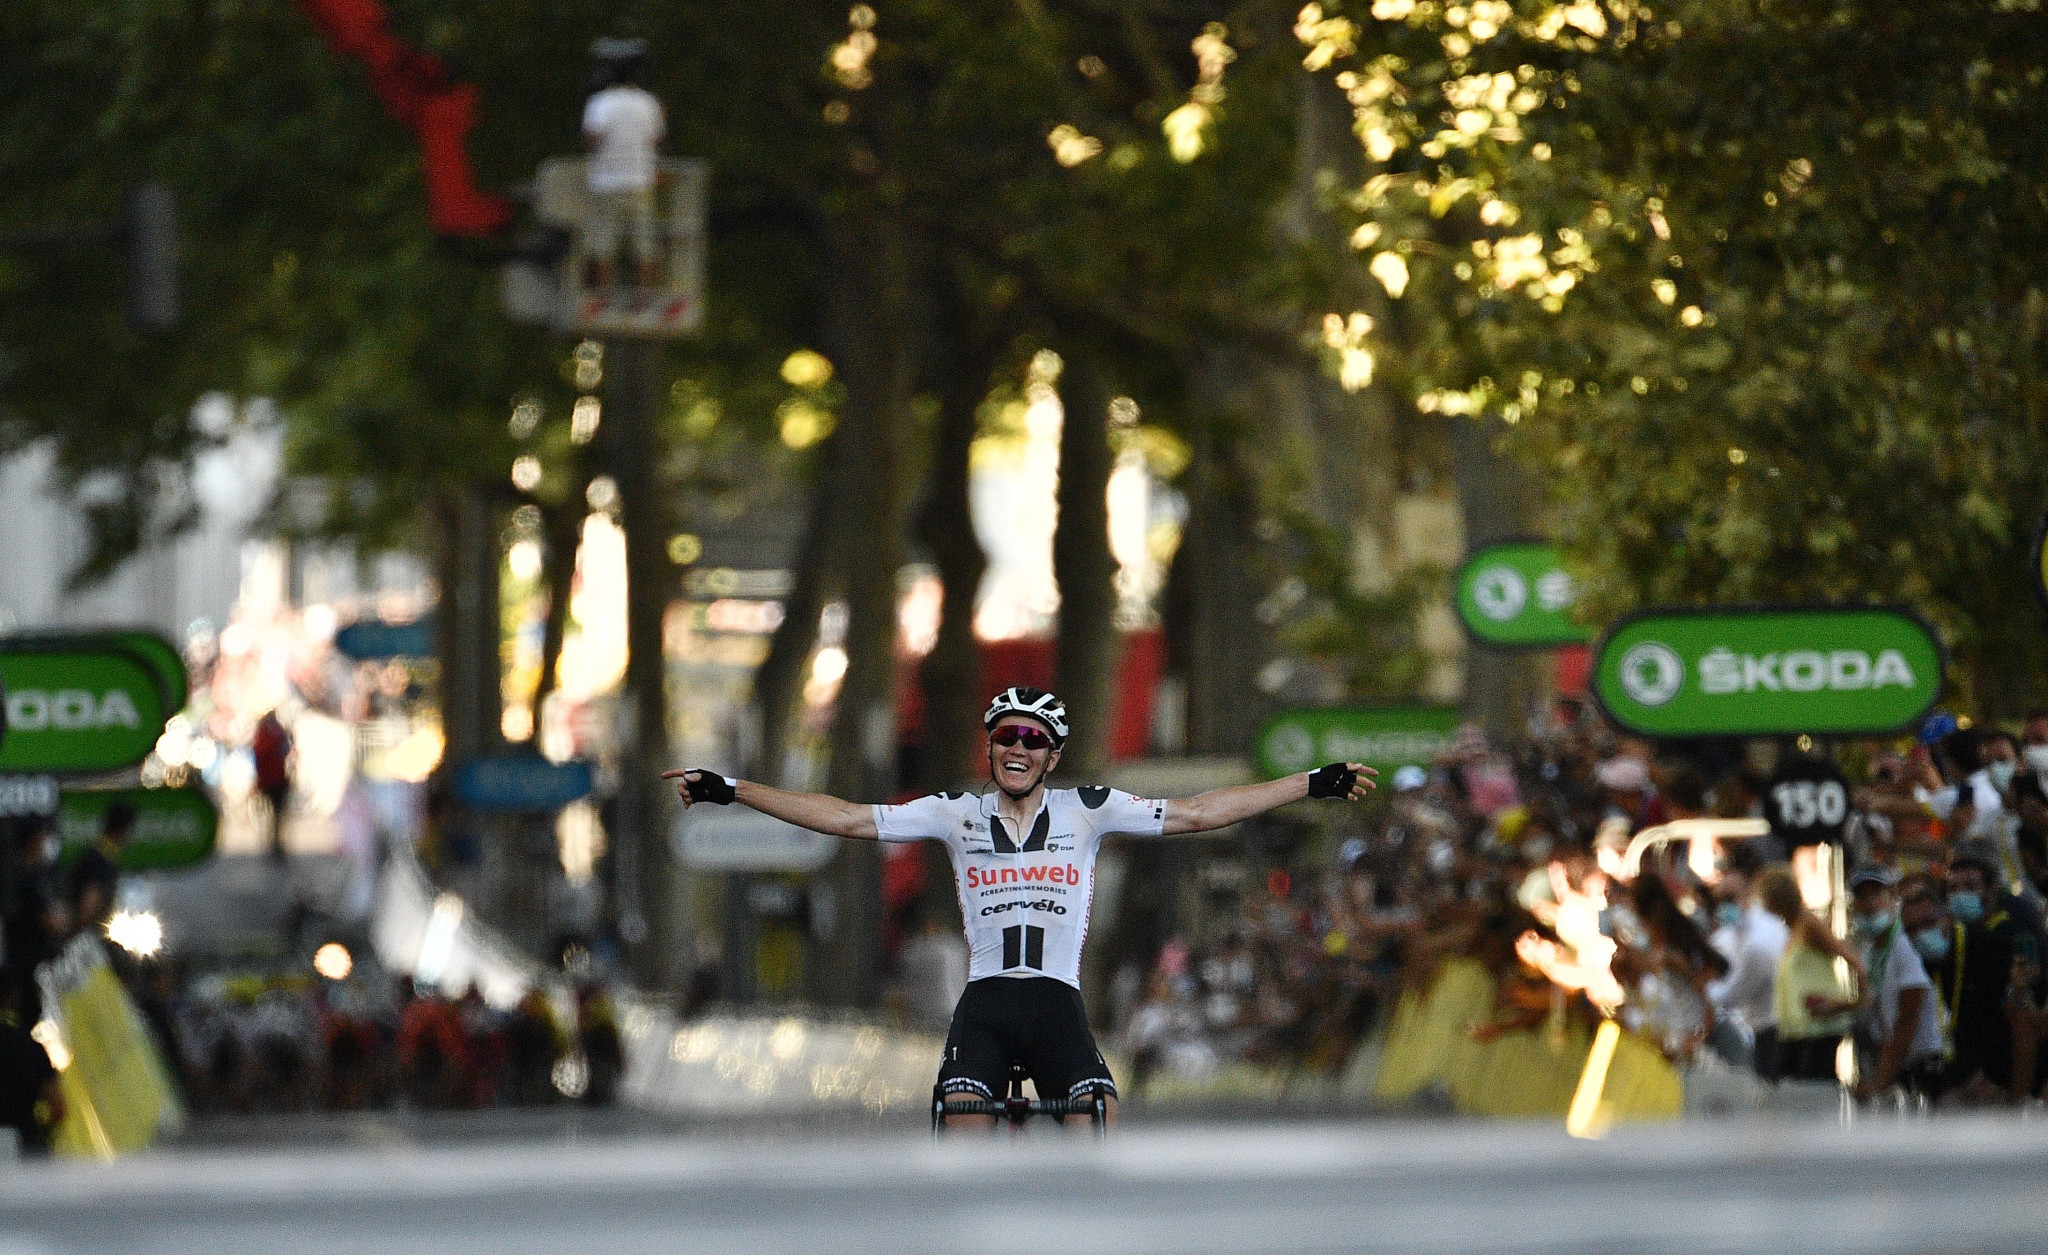 Andersen escapes in closing kilometres for stage win at Tour de France